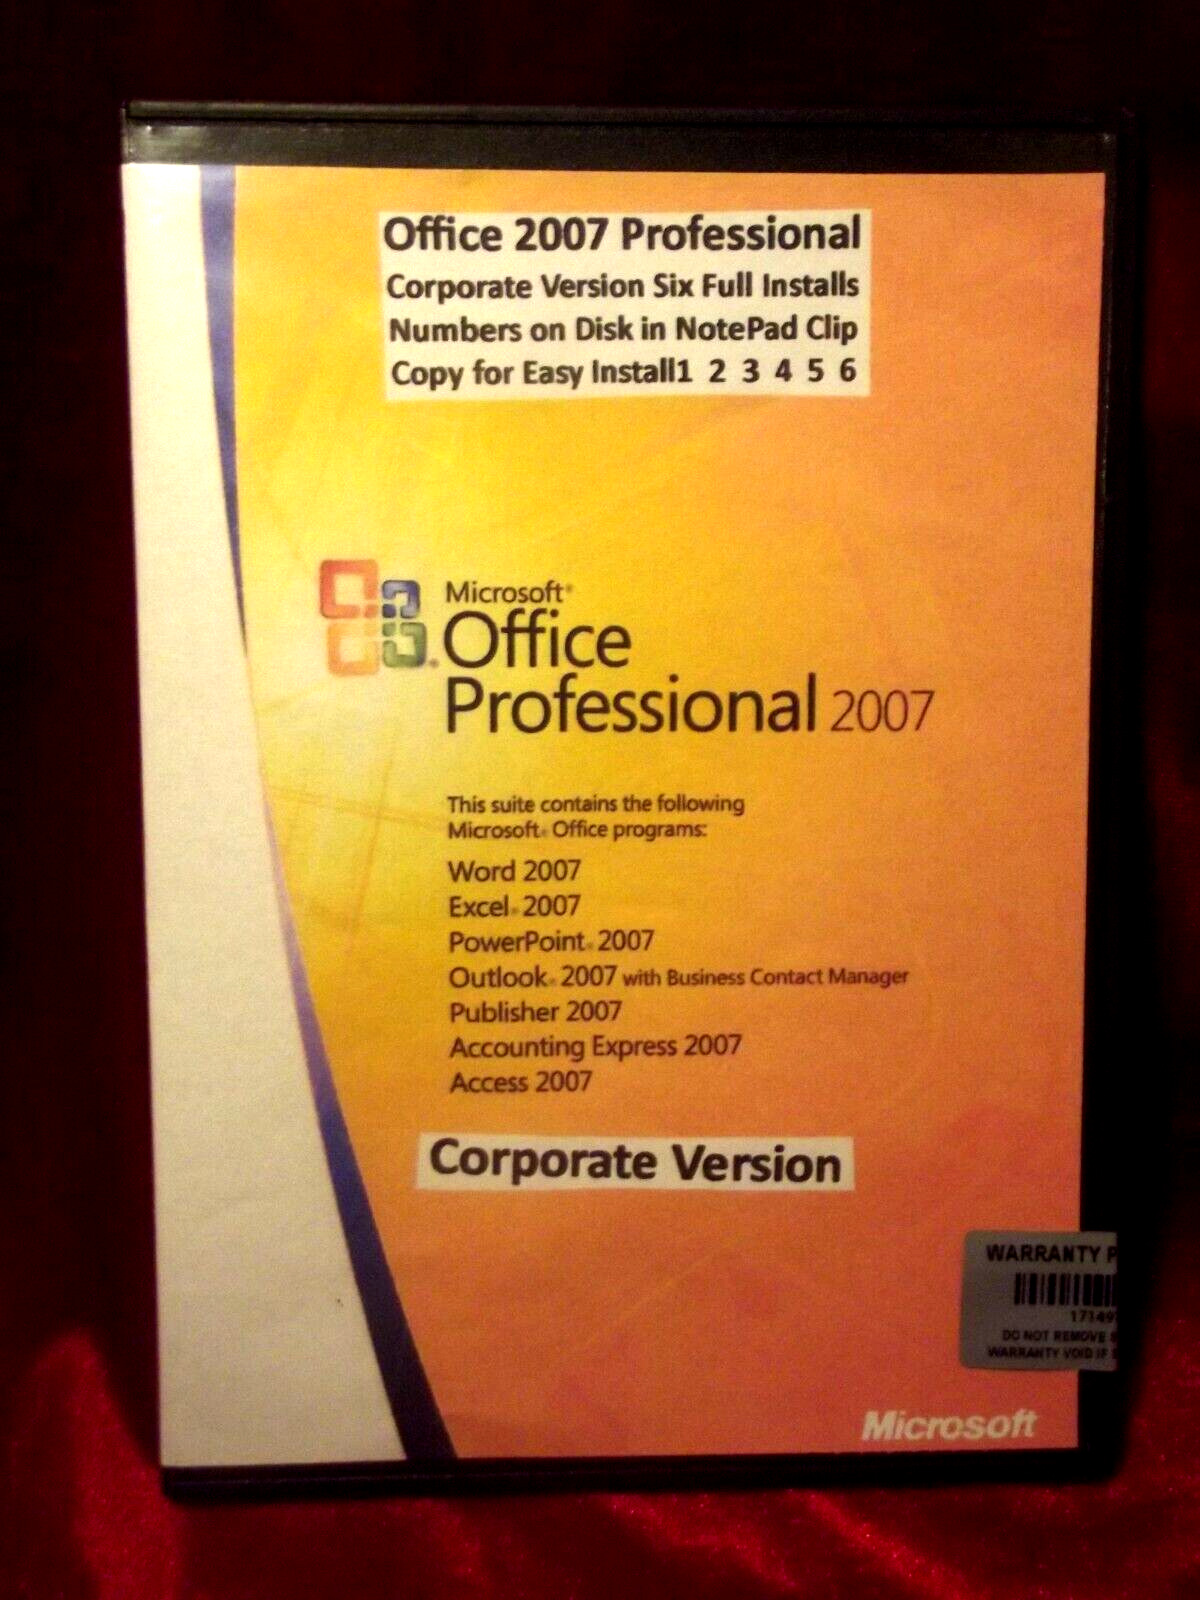 Microsoft Office 2007 Professional Licensed for SIX (6) PCs/Laptops BEST DEAL